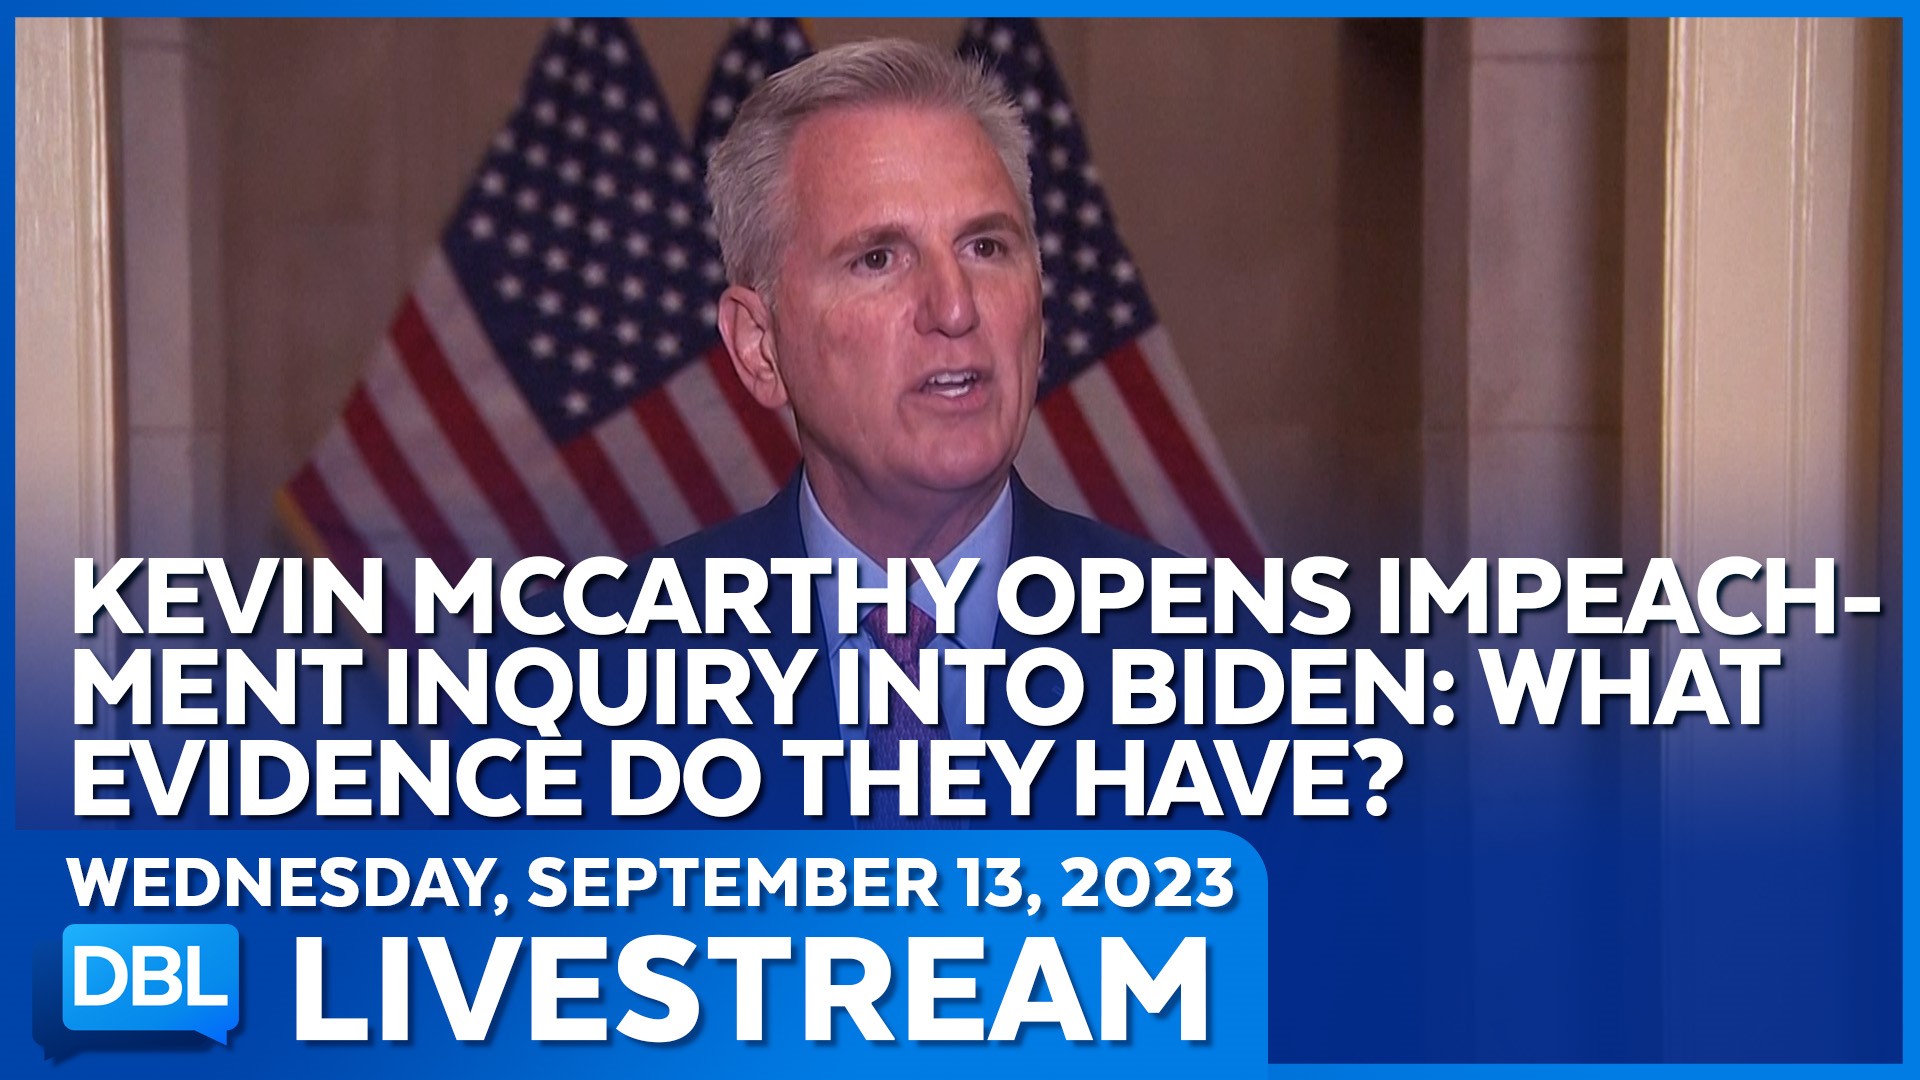 House Speaker Kevin McCarthy Announced Impeachment Inquiry of President Biden